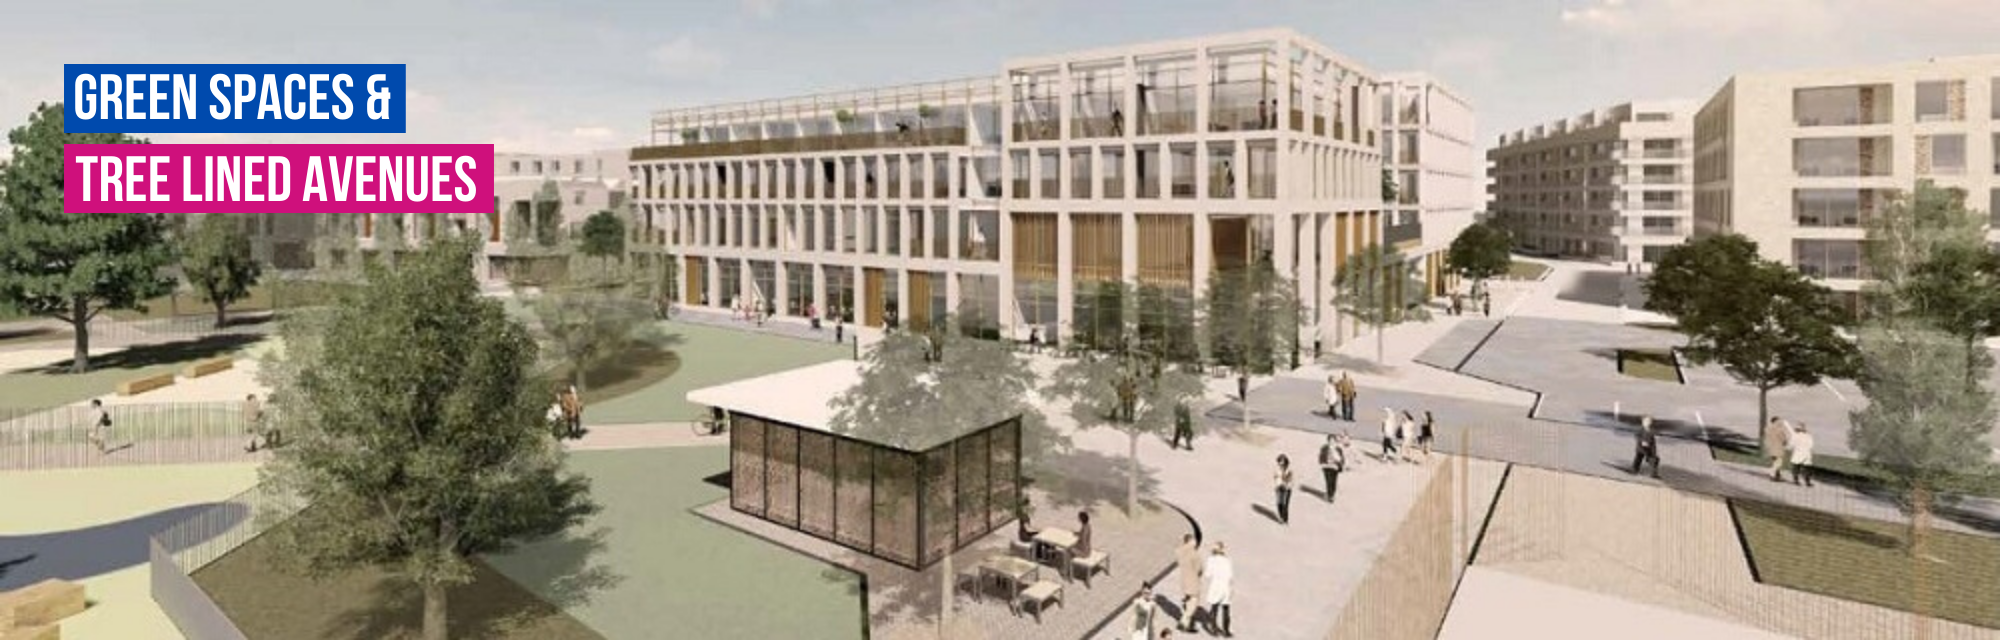 Artist's impression of the public amenity space at the centre of the new development. There are lawns, trees, pedestrian walkways and a kiosk which people are sat outside. 